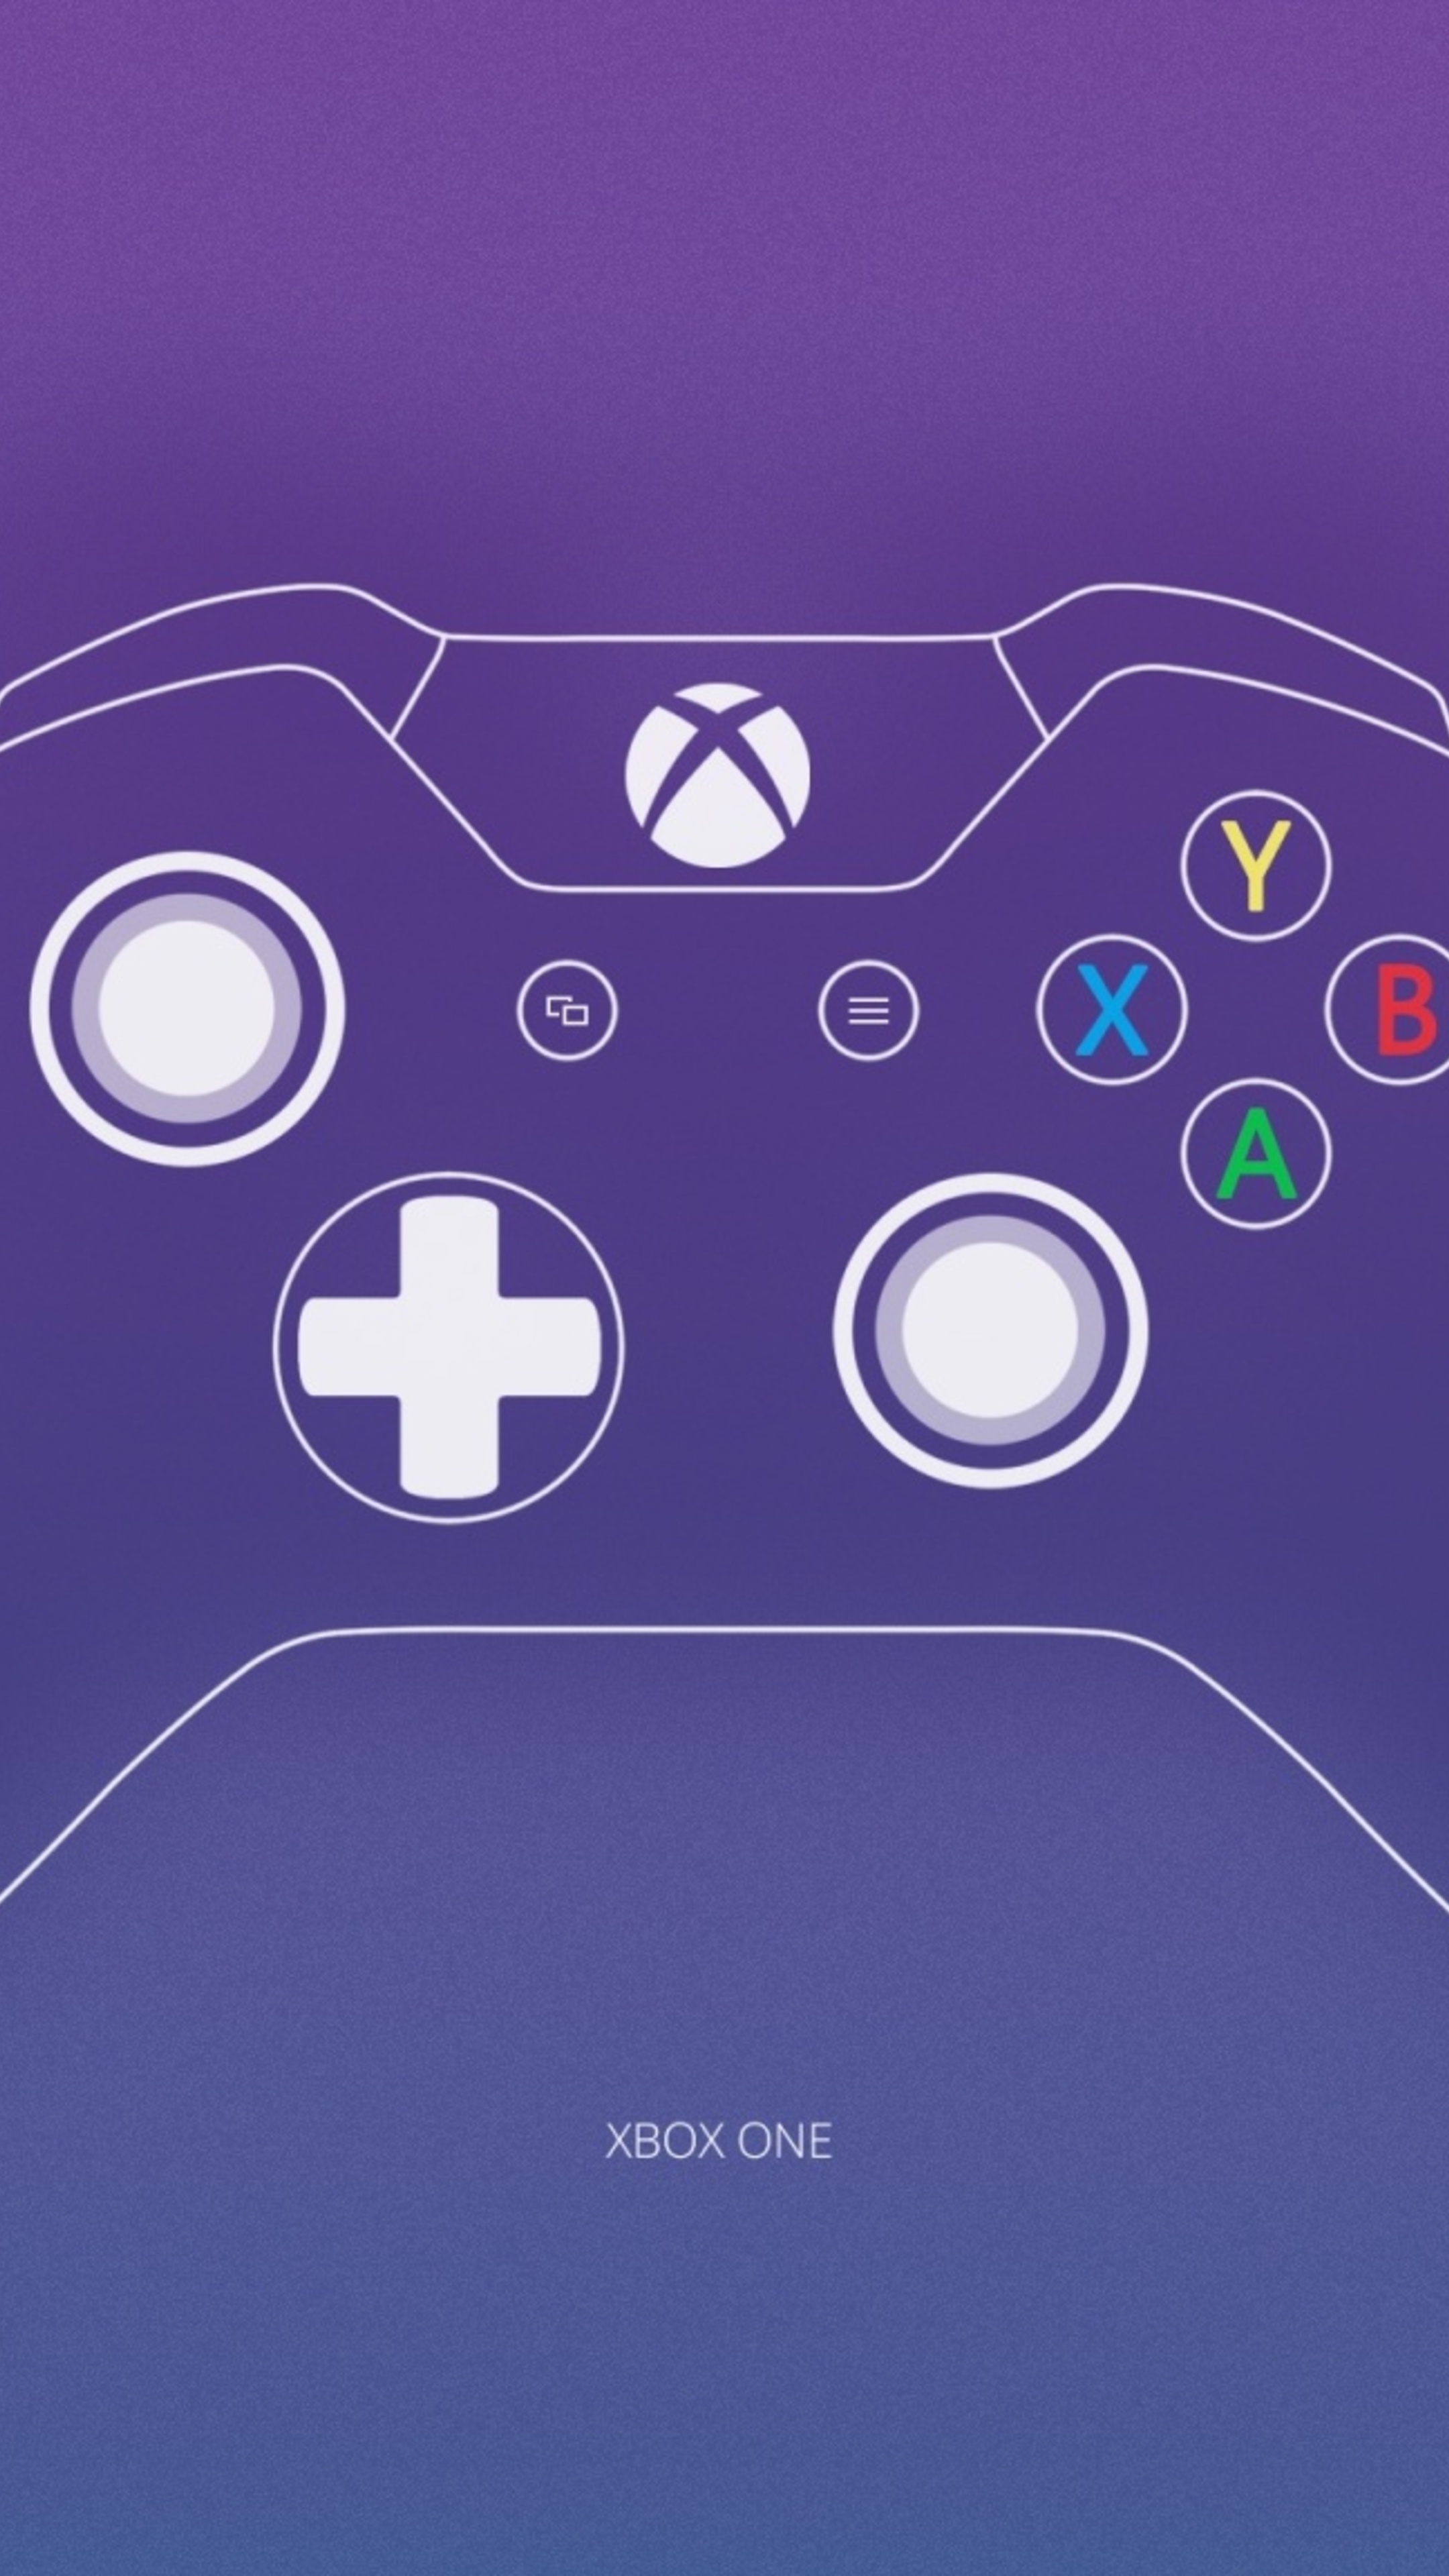 Xbox: A controller, Digital buttons, Analog triggers, Minimalistic. 2160x3840 4K Wallpaper.